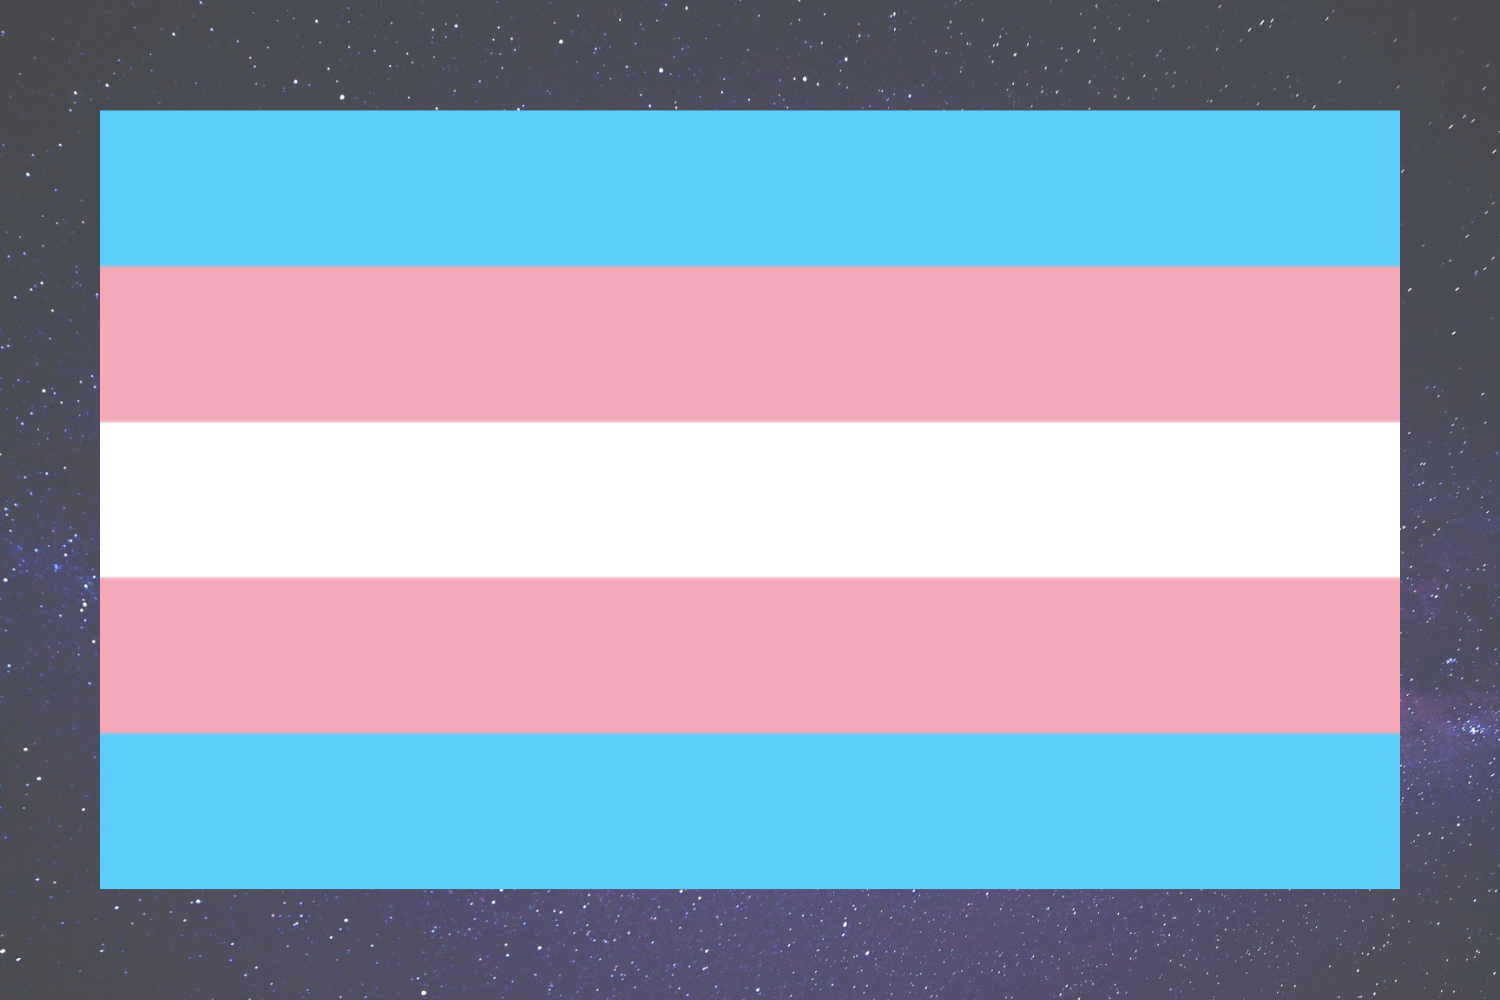 The Transgender Flag - A flag with 5 horizontal stripes: two blue stripes on the top and bottom, followed by two pinks stripes above and below a central white stripe. The blue represents men and boys, the pink represents women and girls, and the white stripe represents nonbinary people.